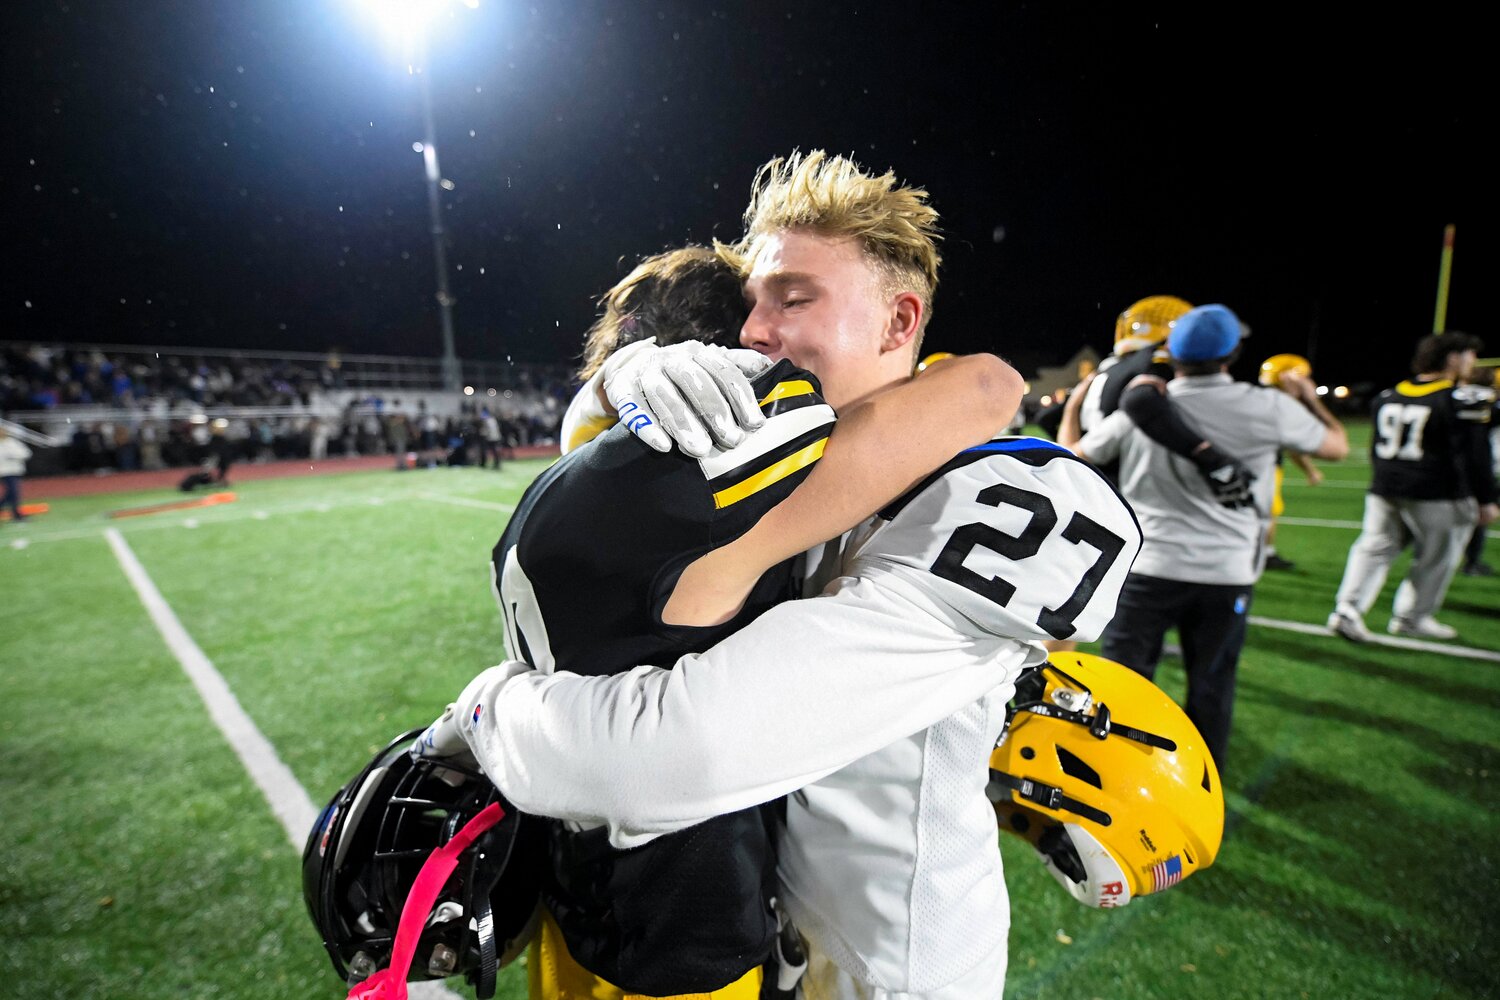 Cousins off the field, Central Bucks West’s Connor Ferzetti and Central Bucks South’s Kevin Hartranft embrace after the final whistle.